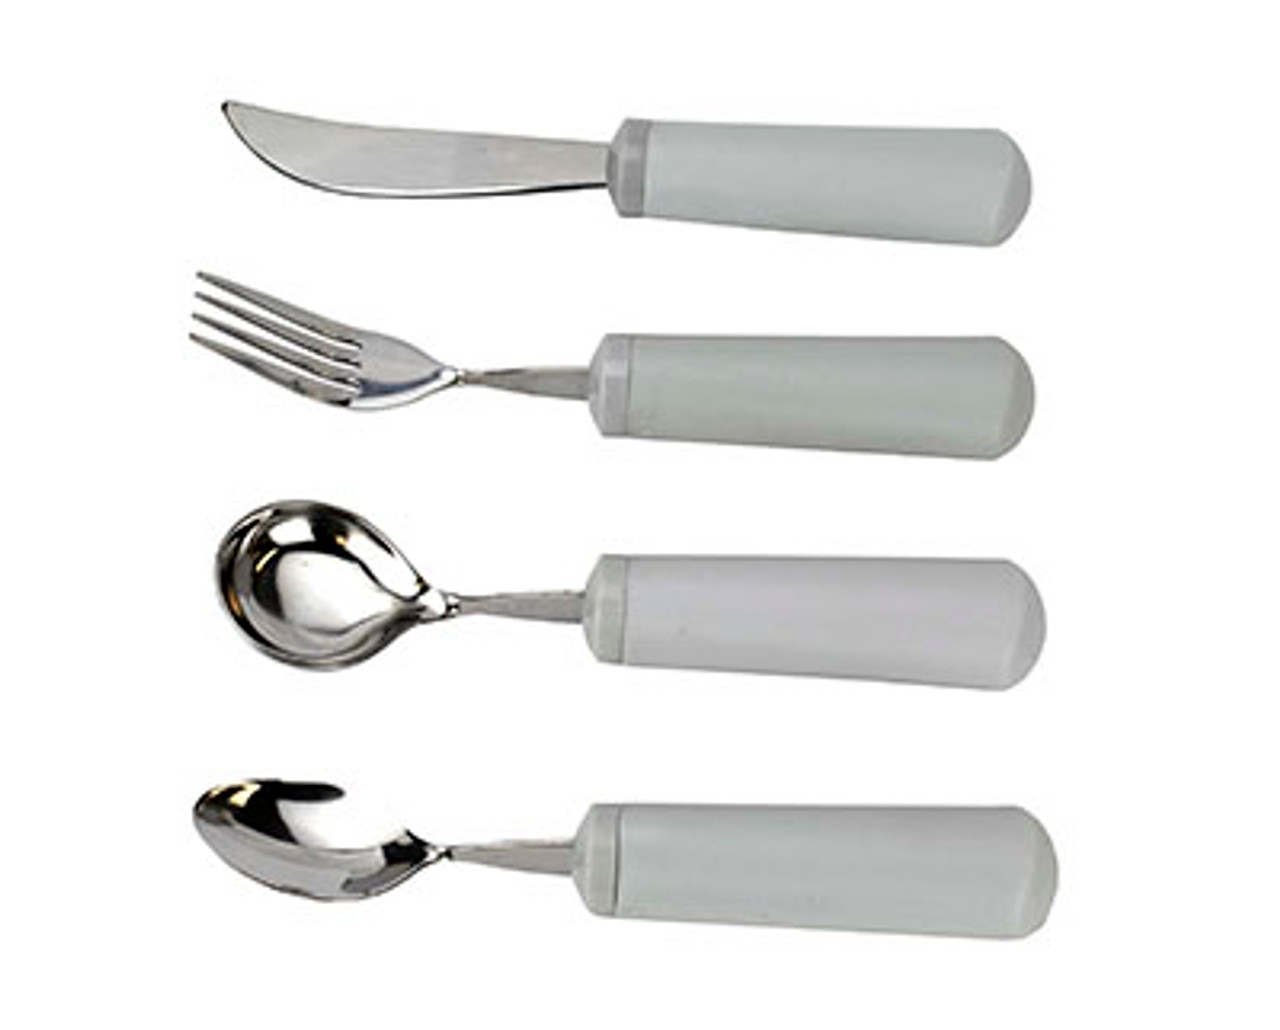 Weighted Adaptive Utensils for Hand Tremors Swivel Spoons Forks